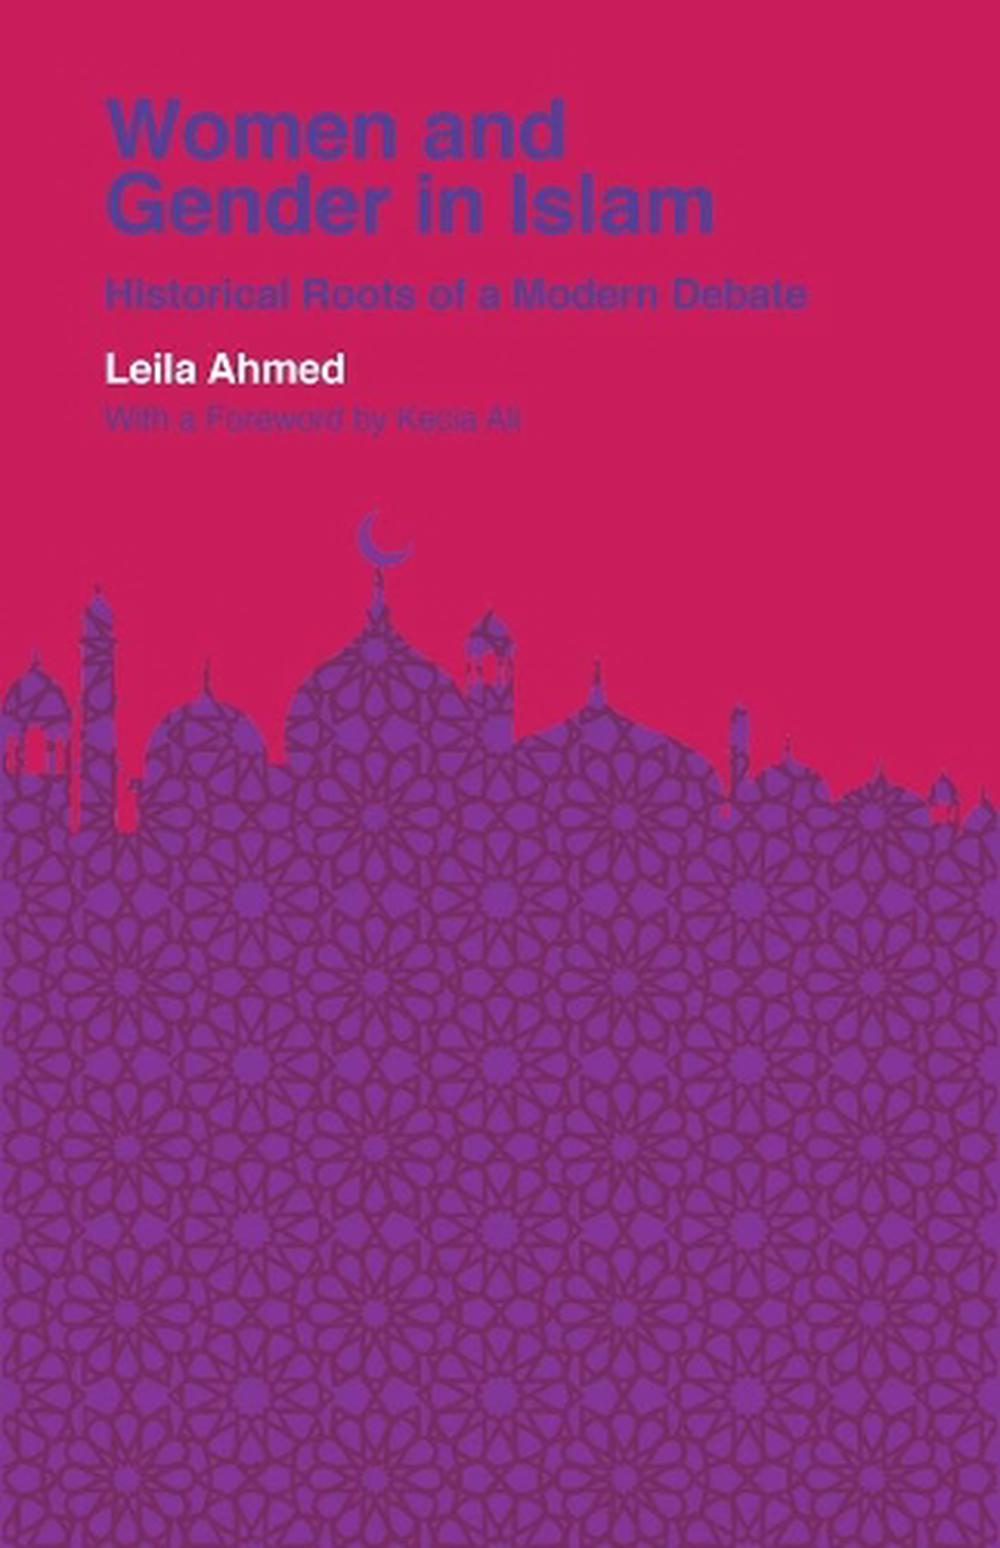 leila ahmed women and gender